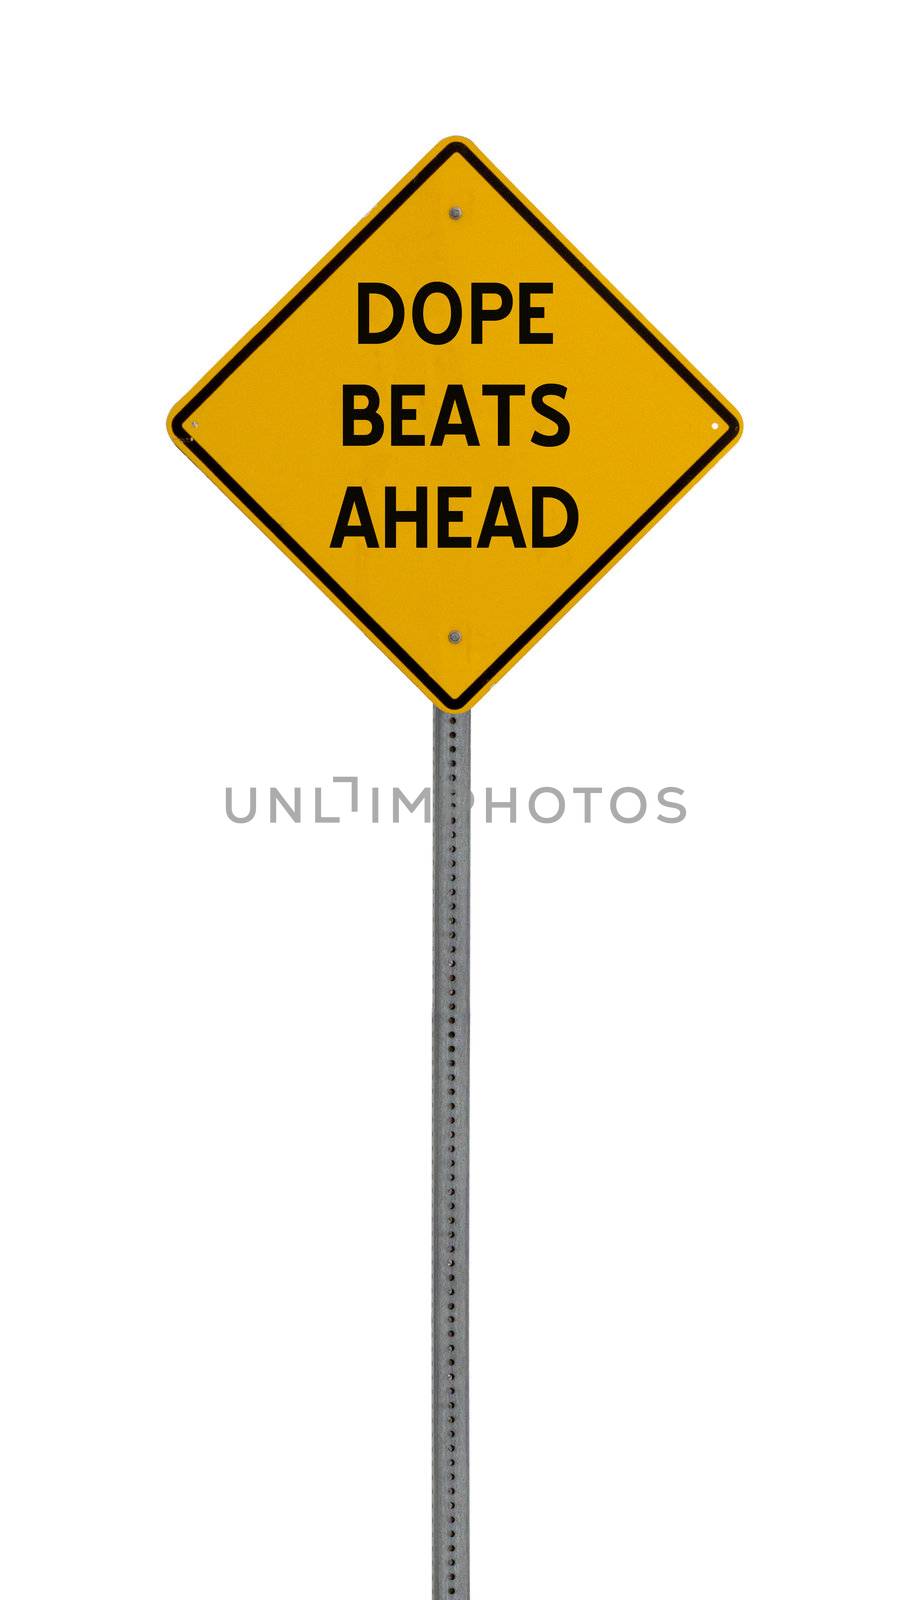 dope beats ahead - Yellow road warning sign by jeremywhat